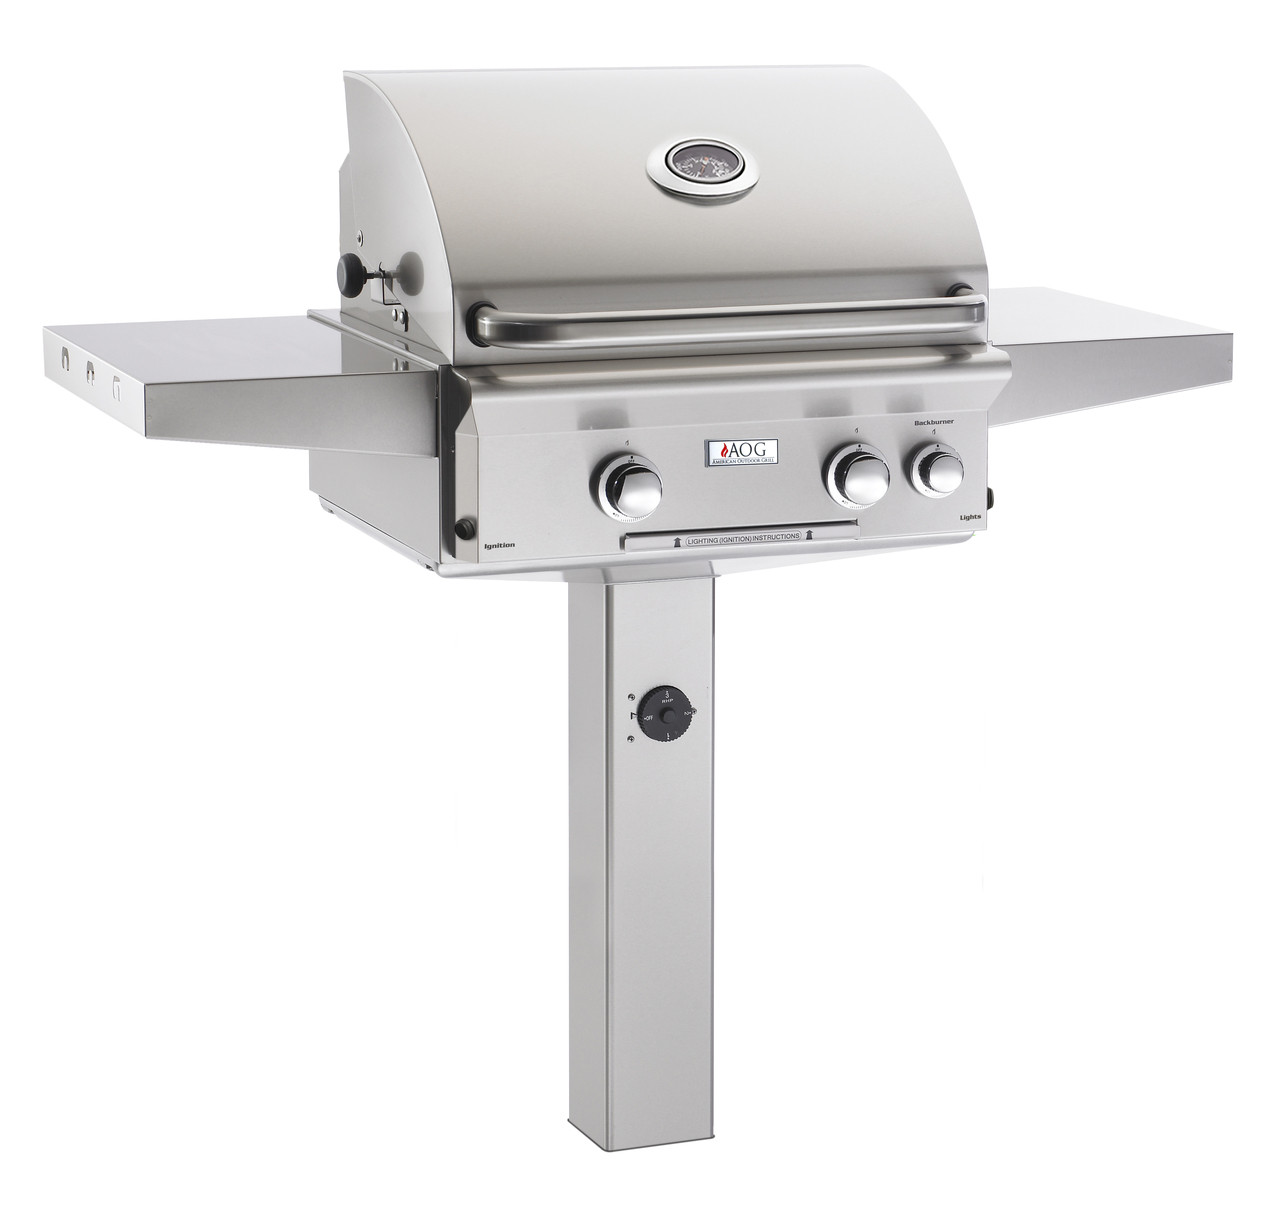 AOG - American Outdoor Grill Parts: Citrusafe Complete Grill